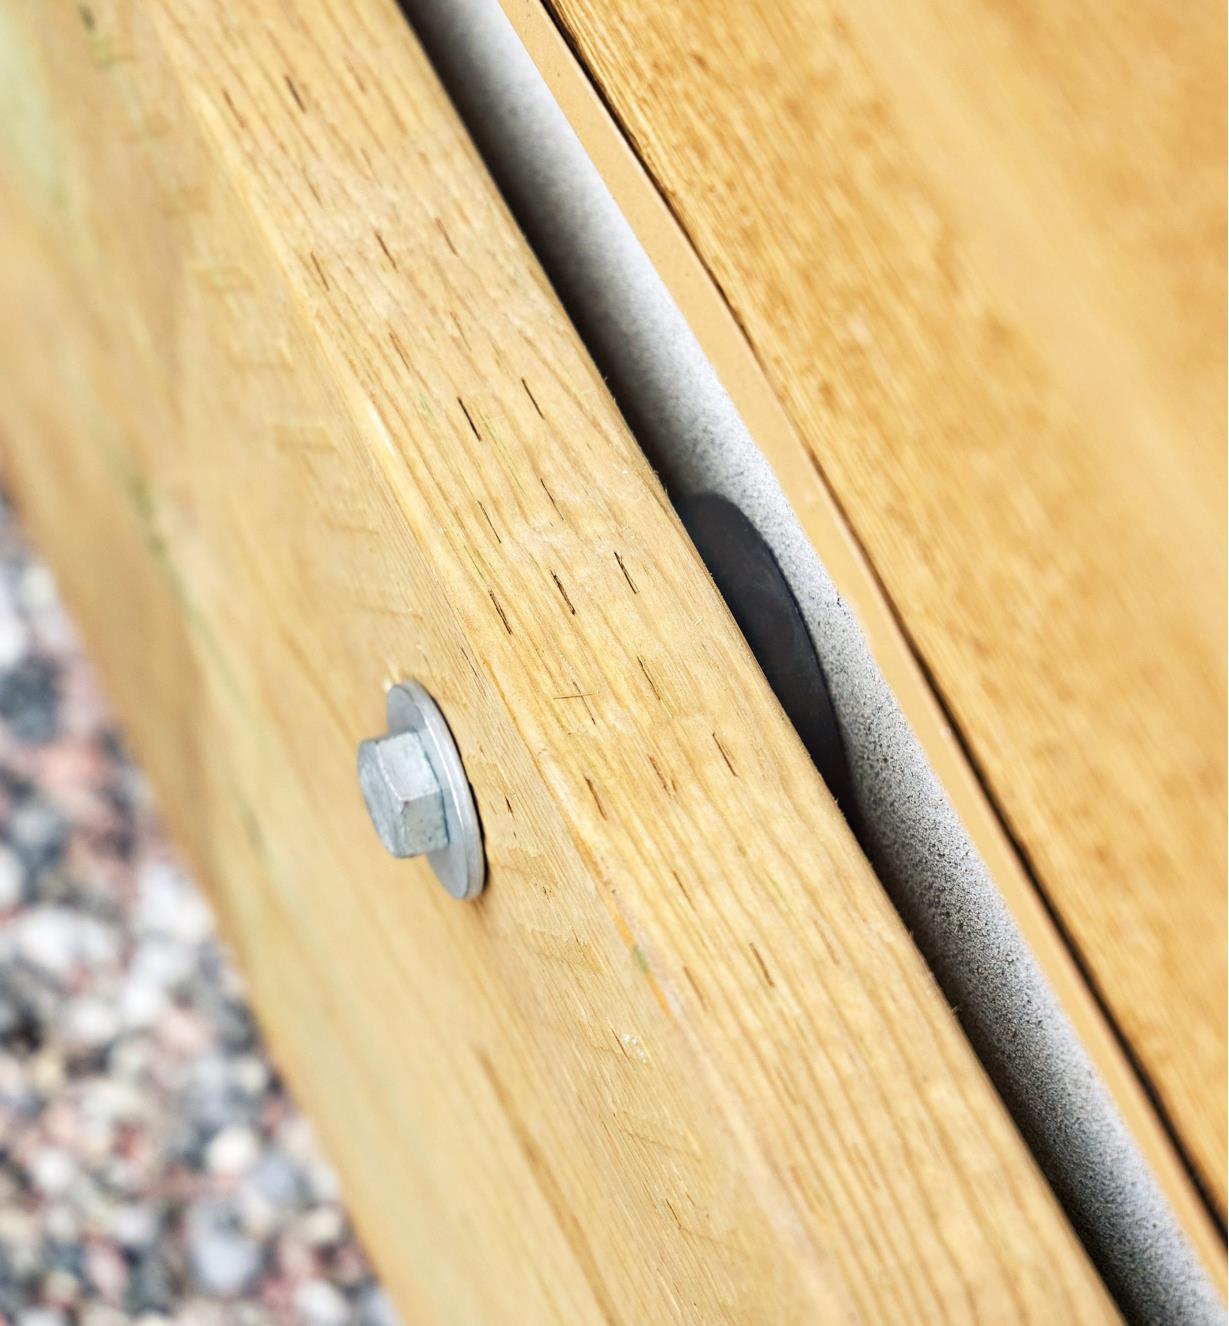 Close-up view of an installed deck-to-wall spacer between a ledger and a structure